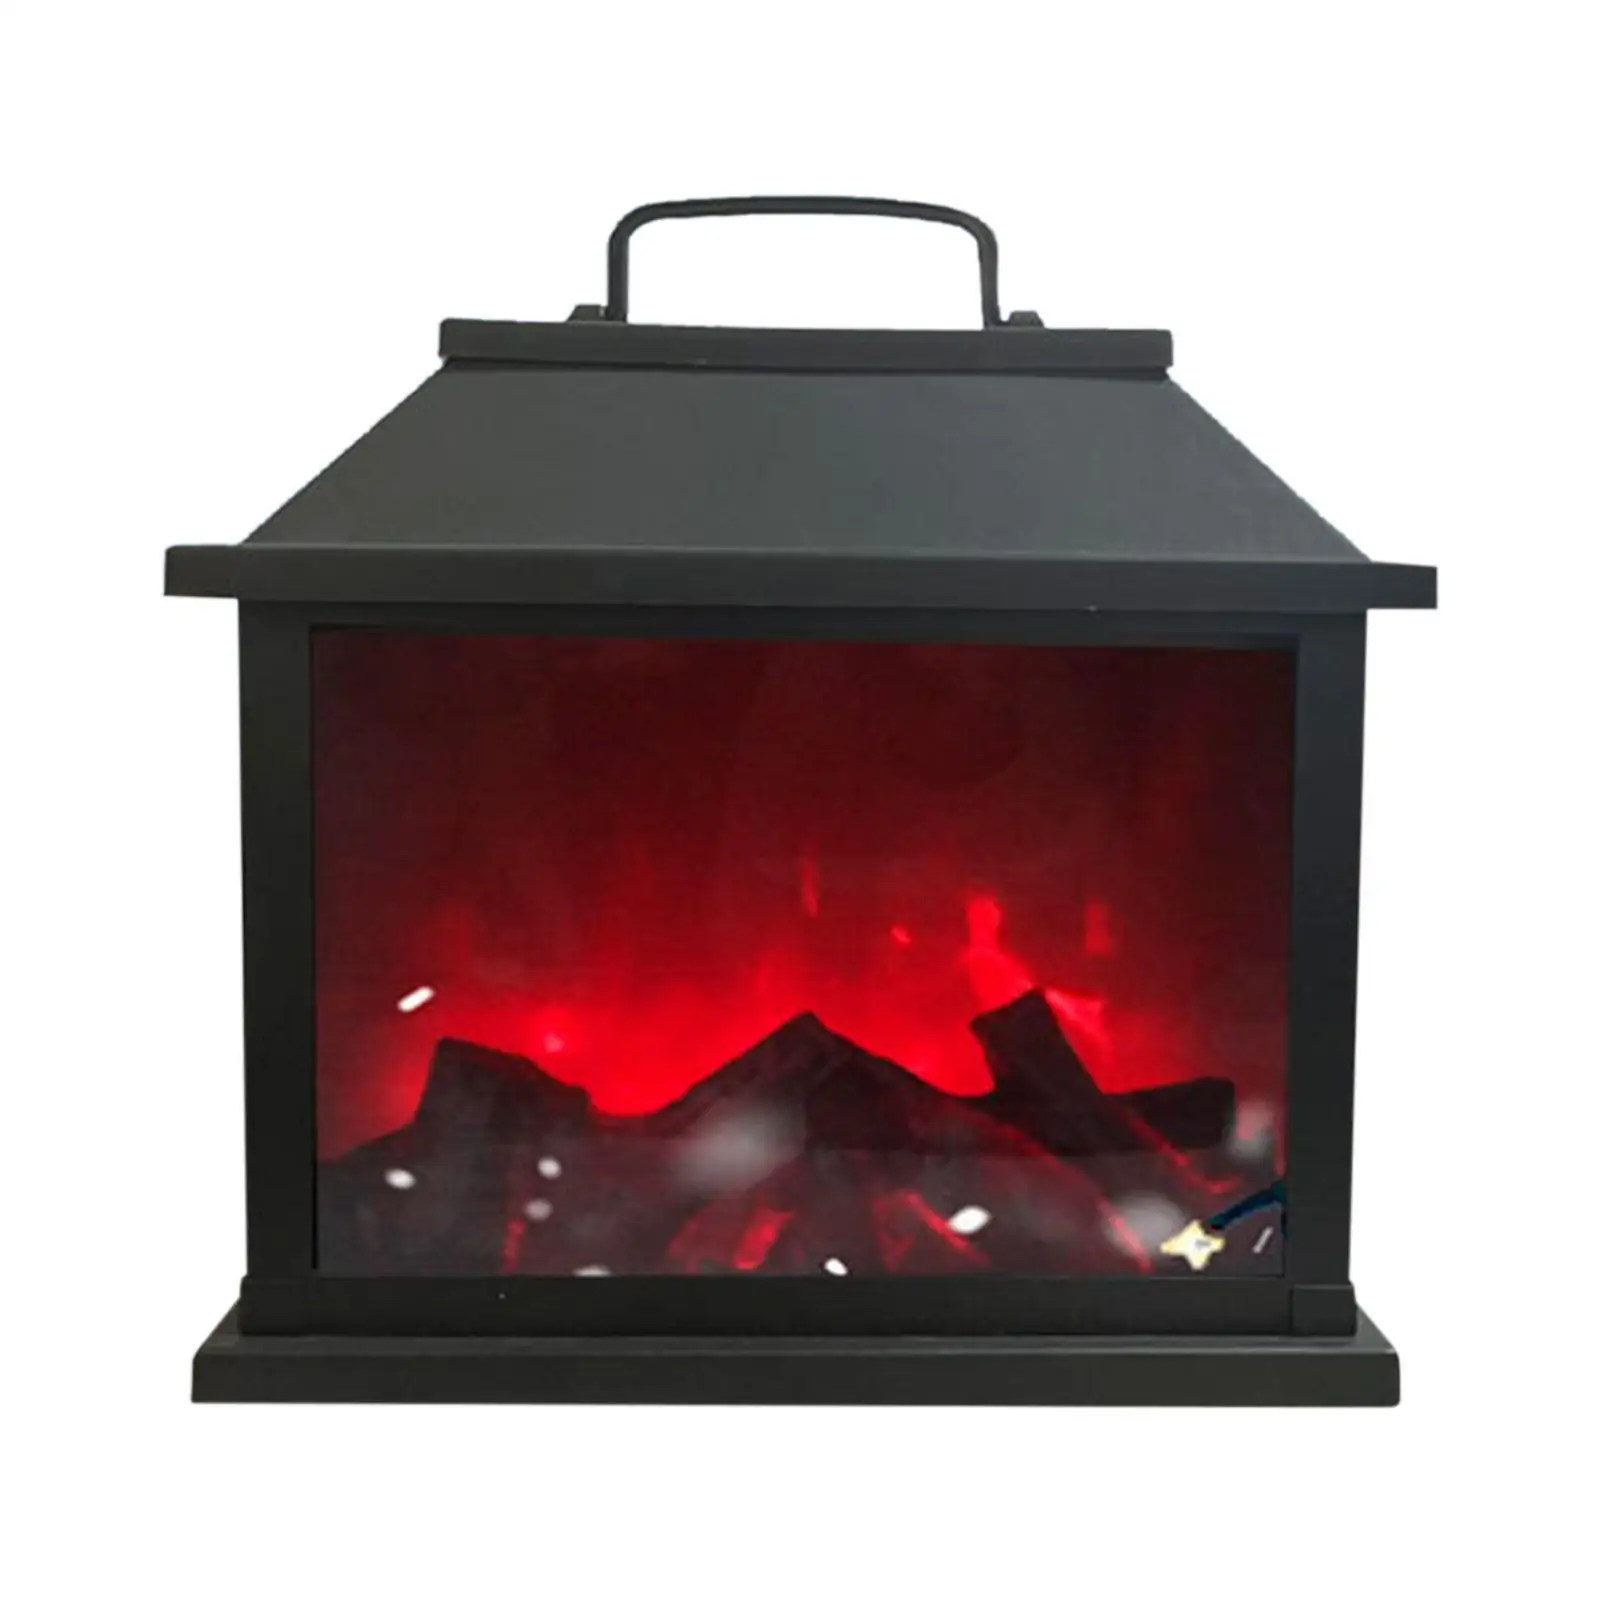 Fireplace Lantern Home Decoration Flame Effect Lighting Fire Lamp Centerpiece Lamp for Christmas Use